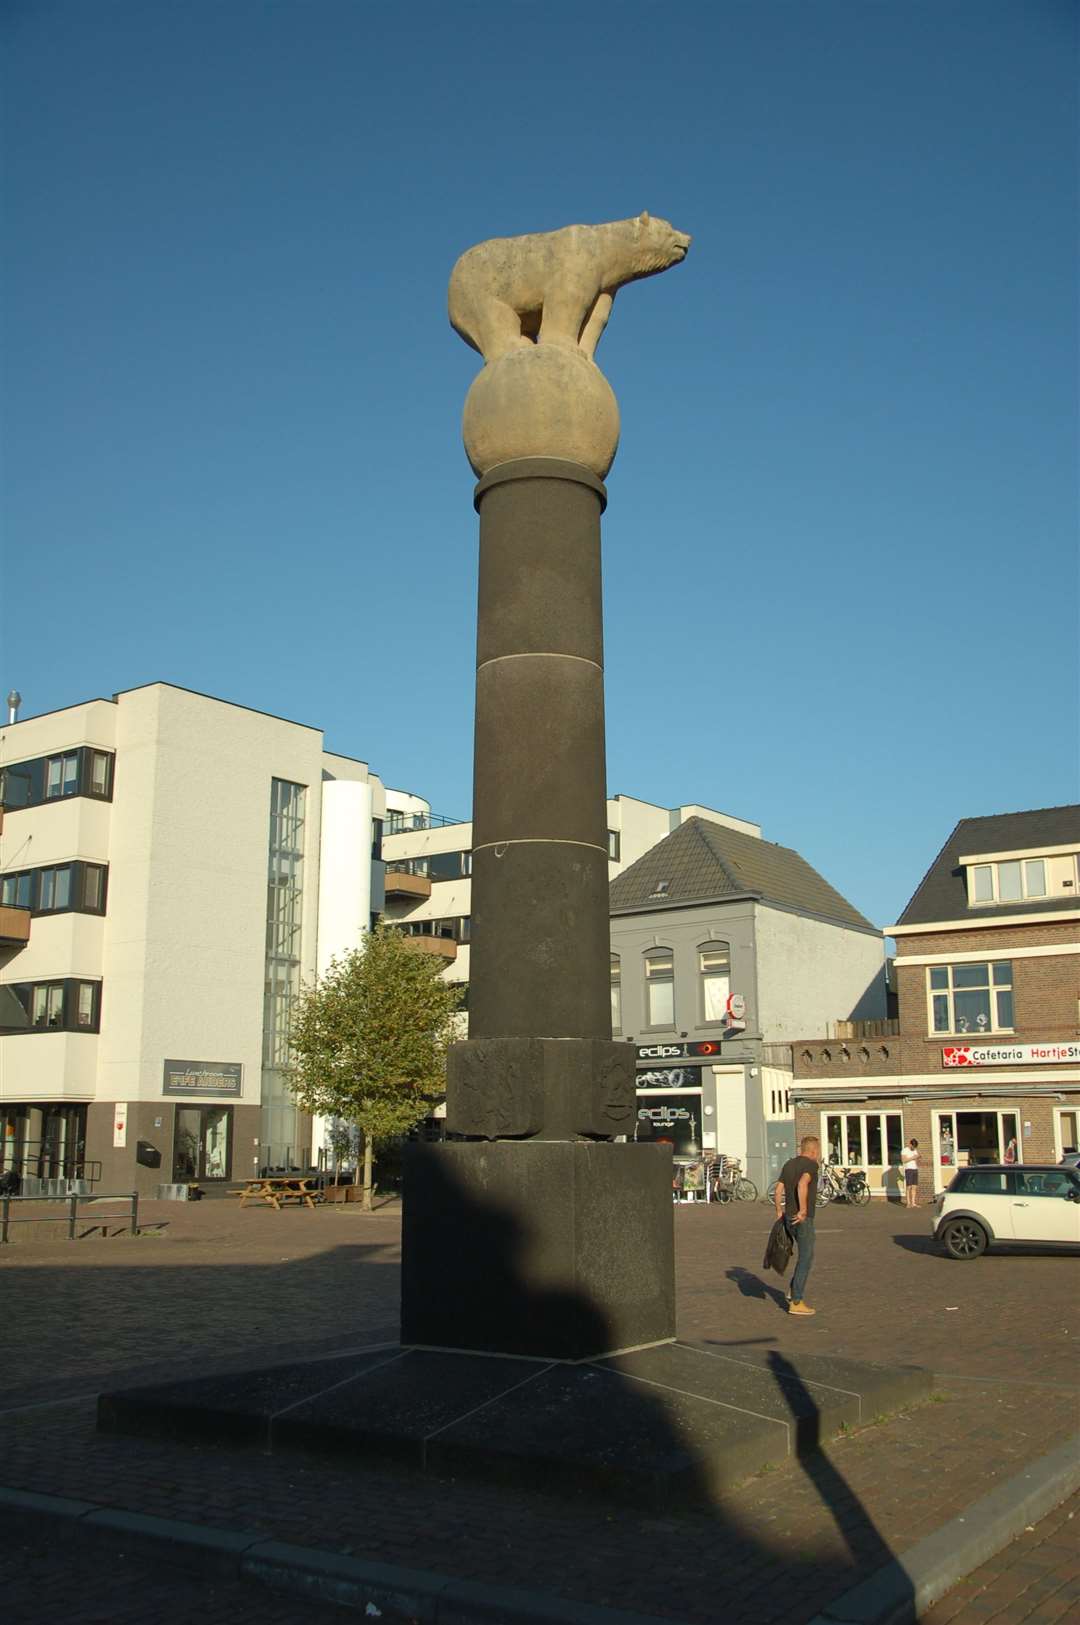 The Polar Bear monument to the British troops who liberated Roosendaal.